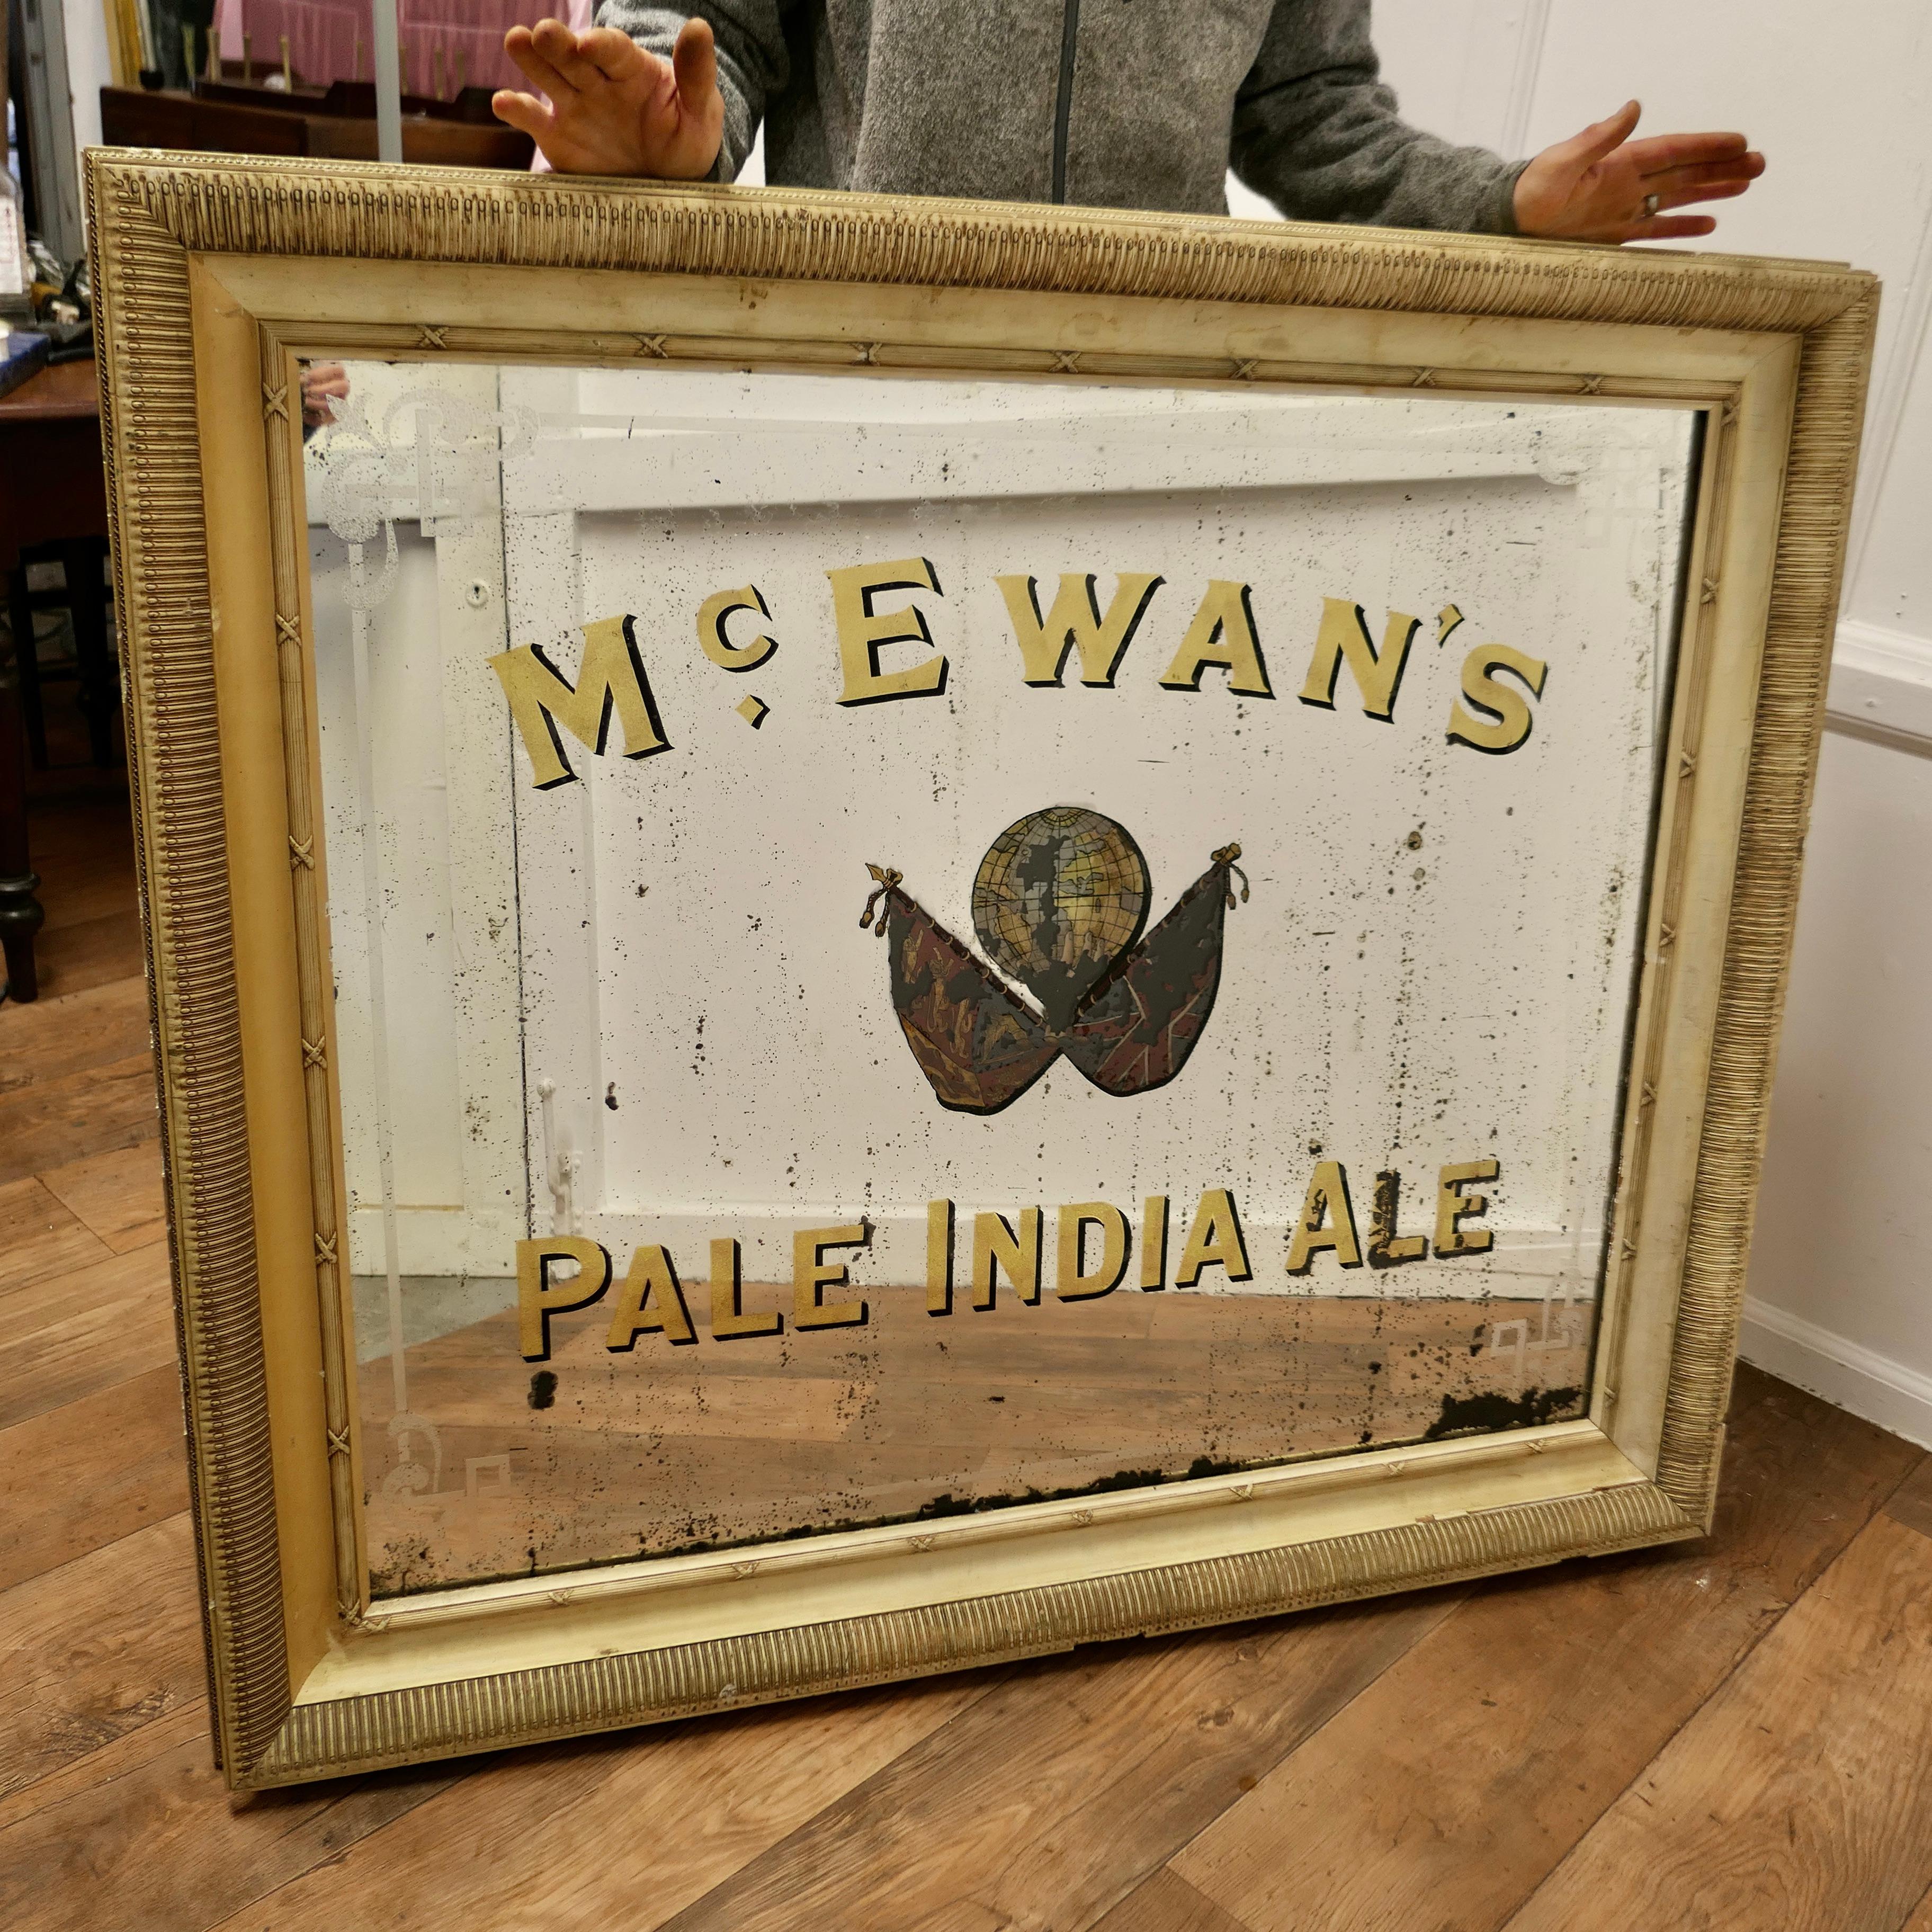 A Large McEwan’s Pale India Ale Advertising Mirror, Pub Sign Mirror for McEwans

This is a rare surviving pictorial advertising mirror, advertising McEwan’s Pale India Ale, in gold leaf with etched glass  
The Mirror has the colourful Iconic Logo at